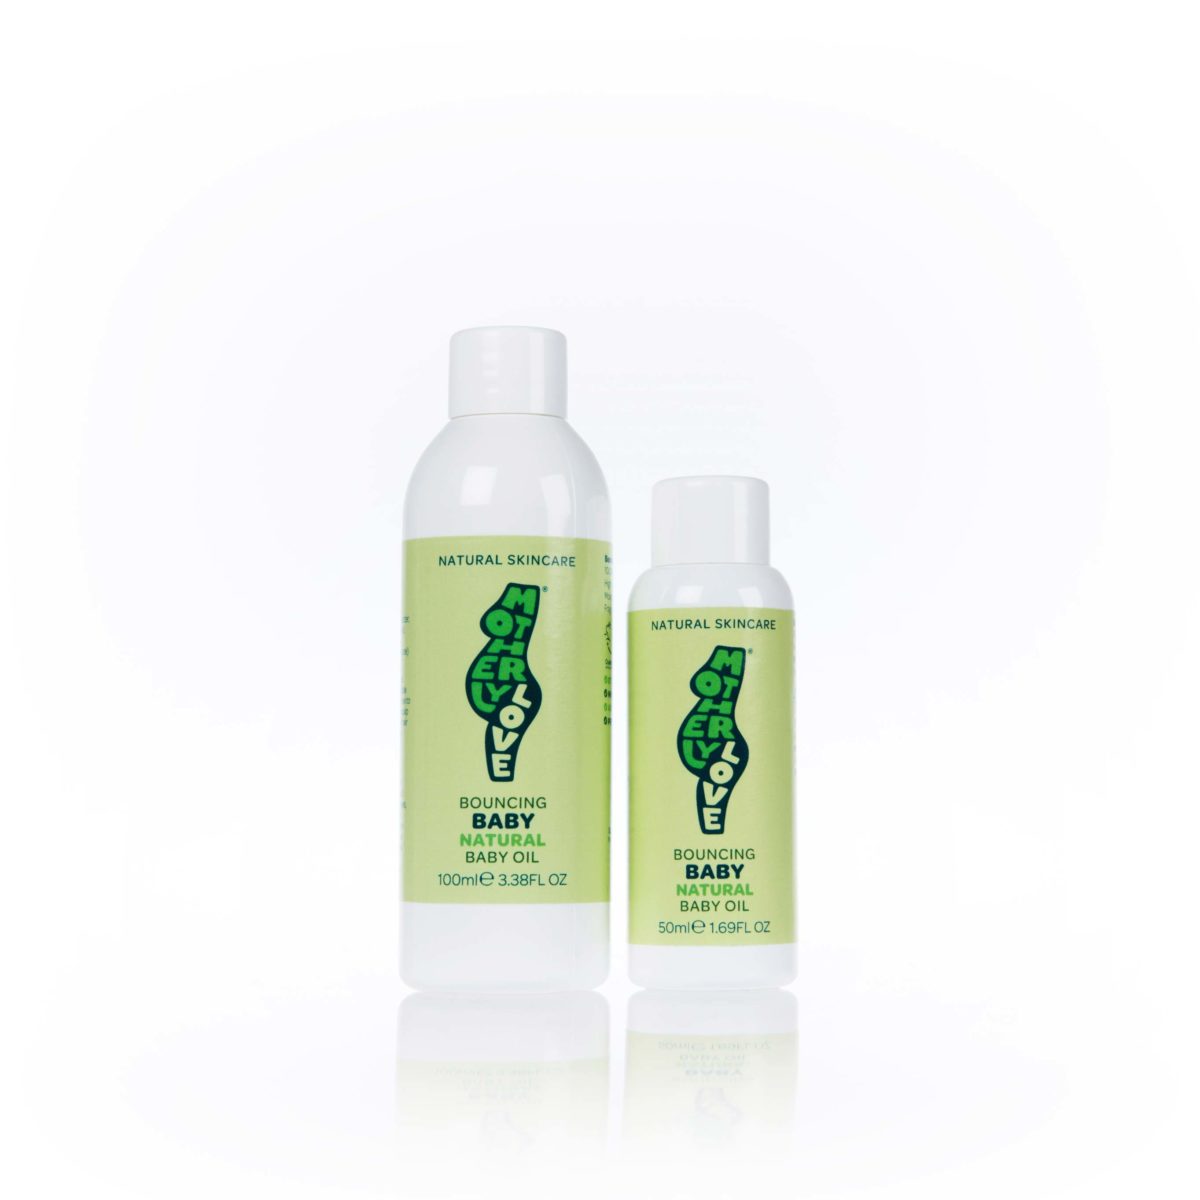 Baby Massage Oil Bouncing Baby in 2 sizes